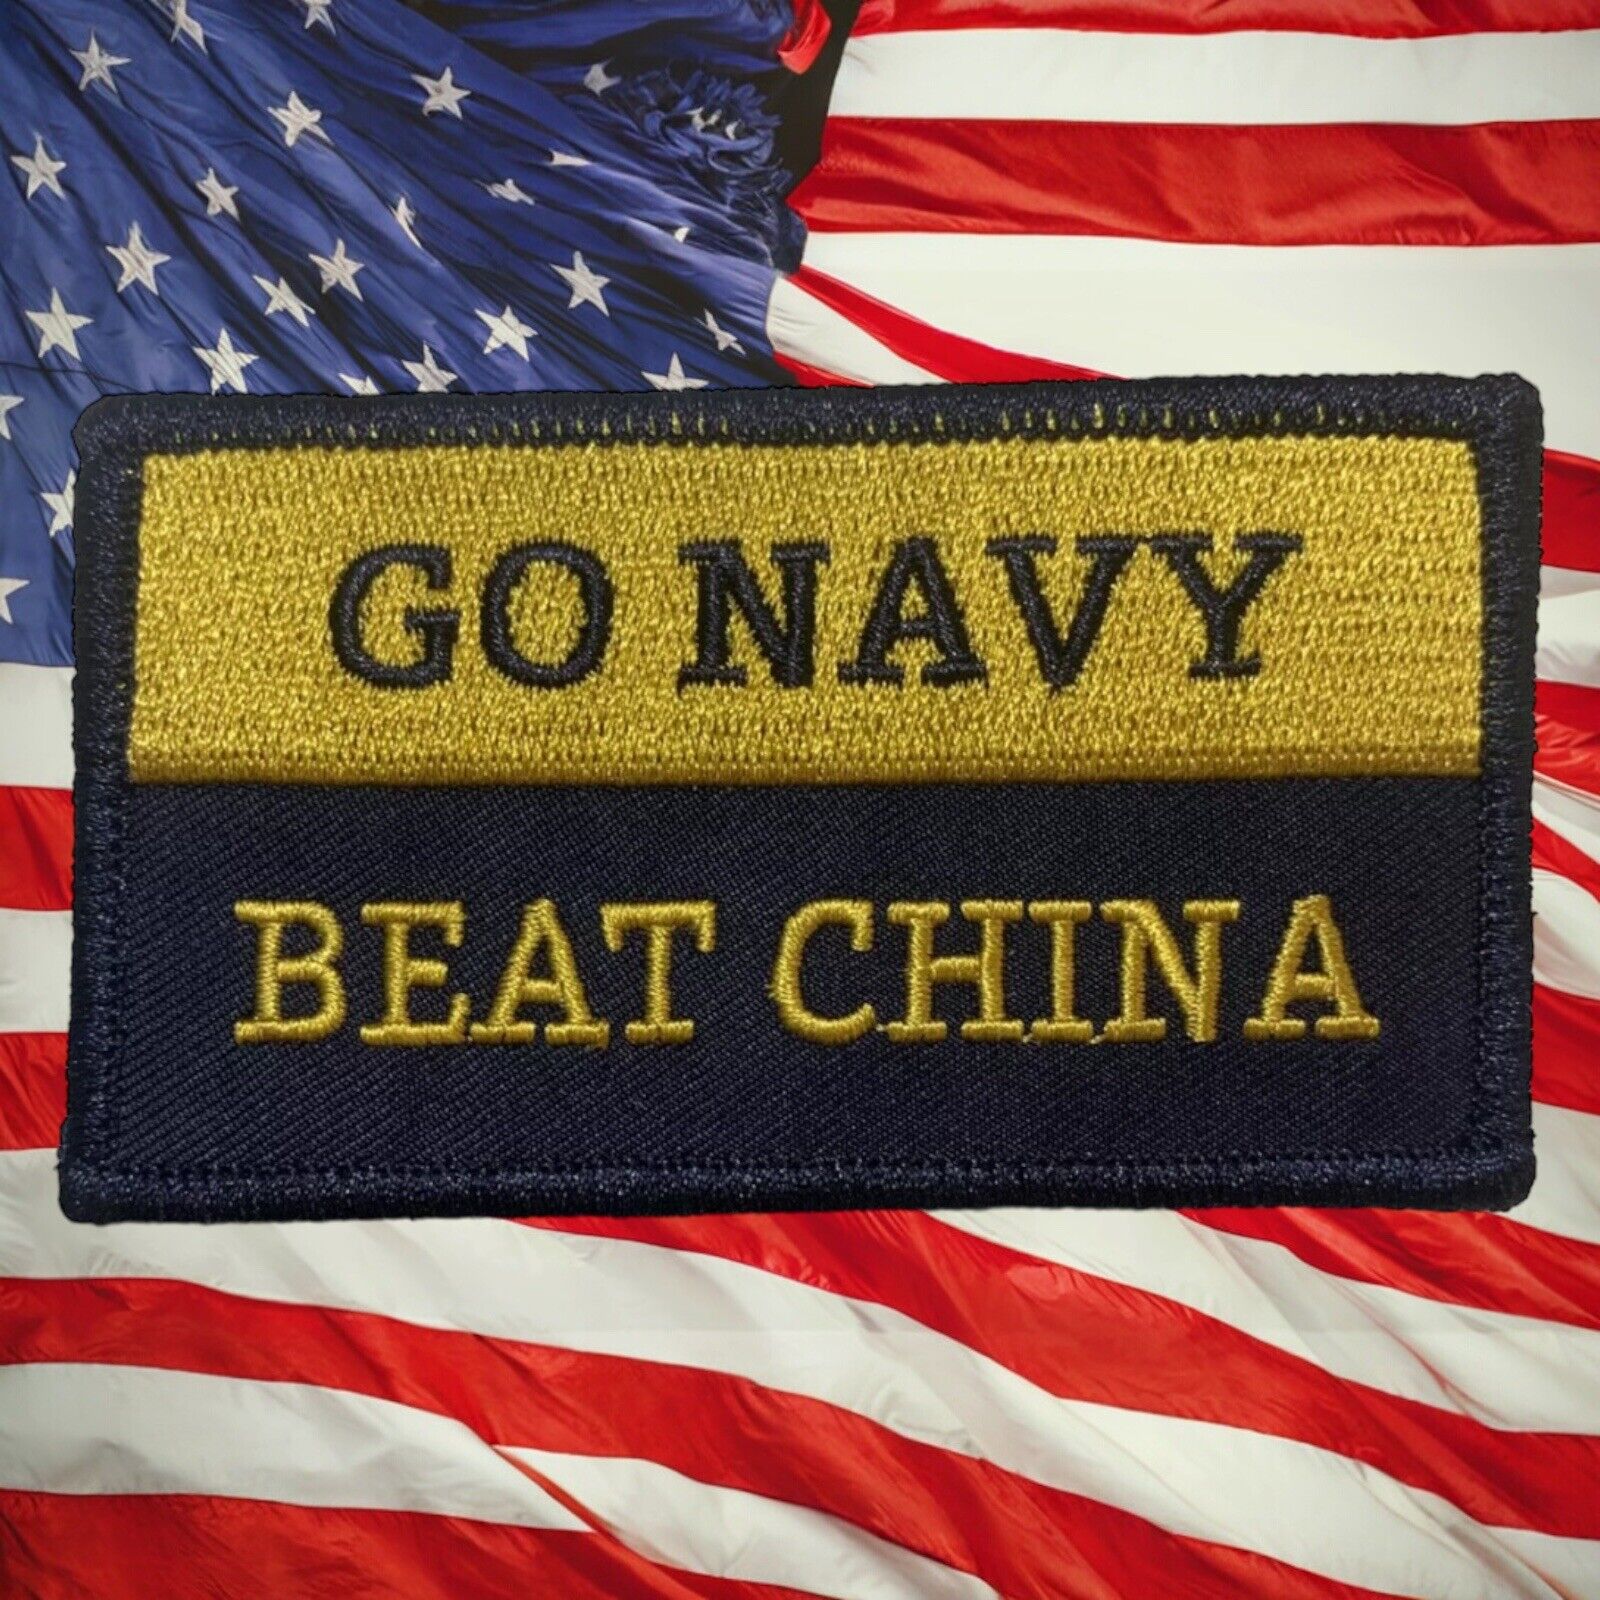 U.S. Navy “Go Navy Beat China” Official Velcro Back Patch (2x3.5”); Patriotic